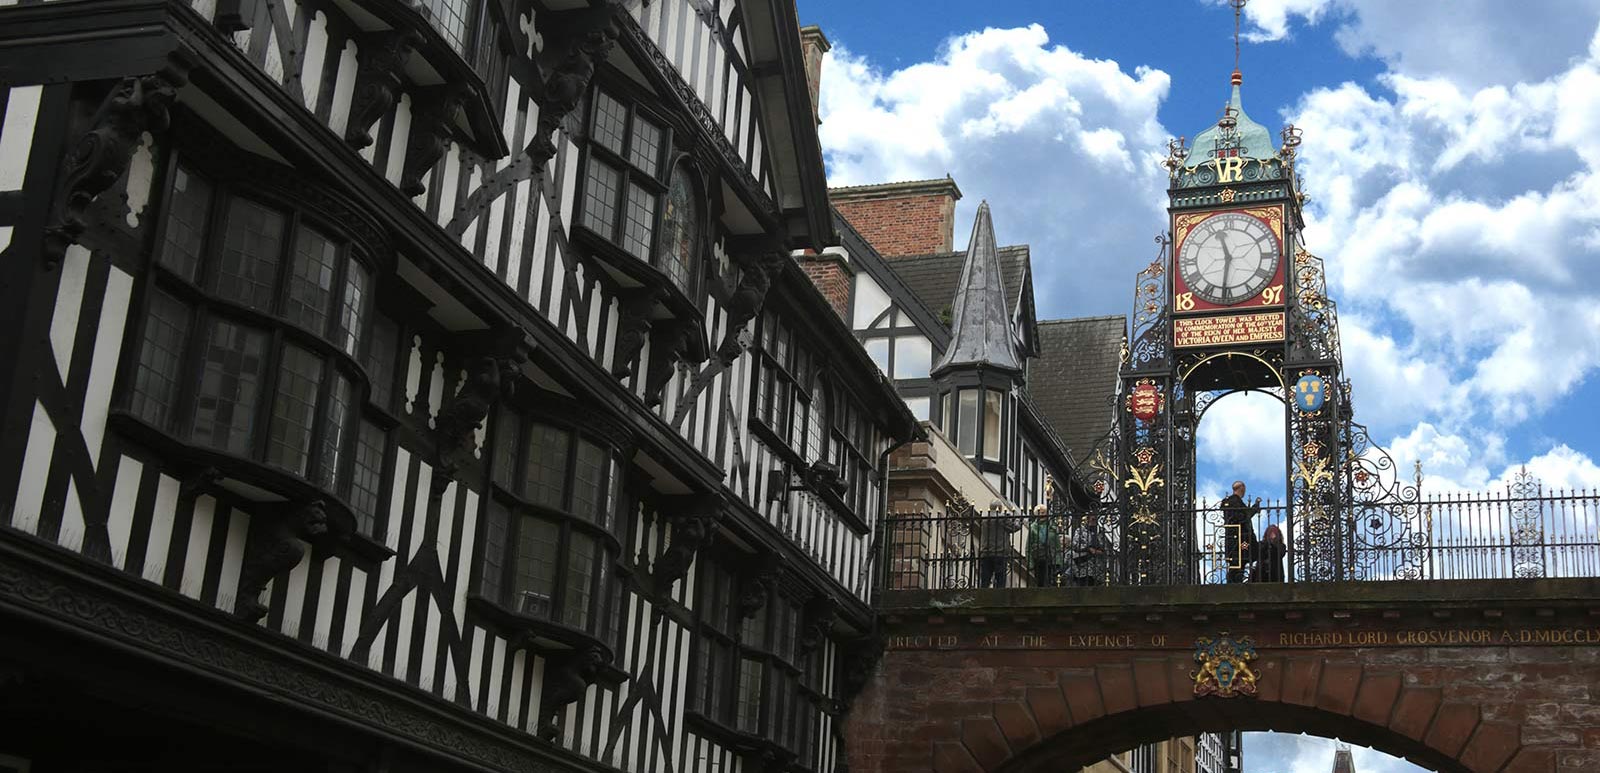 Eastgate Clock in Chester photographed by Sam Davies